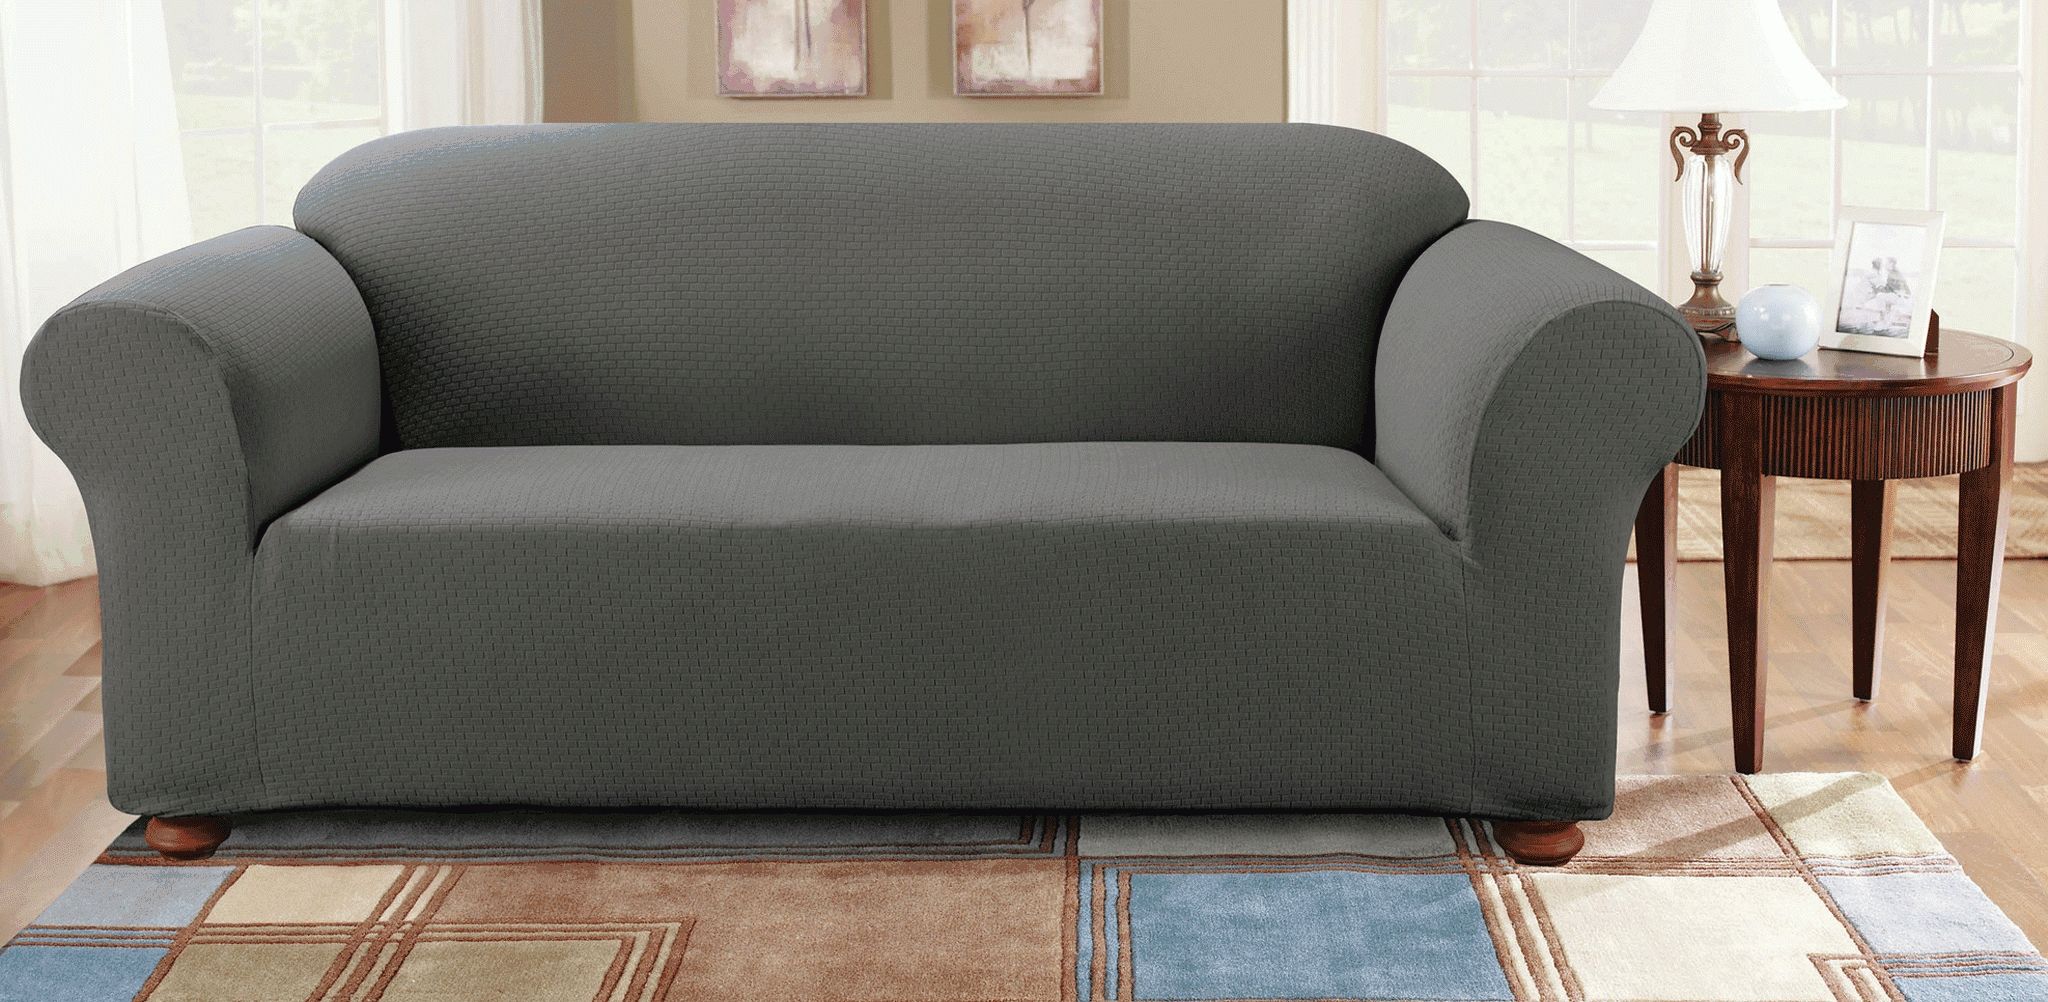 Furniture: Couch Covers At Walmart | Chair Covers At Walmart Inside Sofa And Chair Covers (Photo 5 of 30)